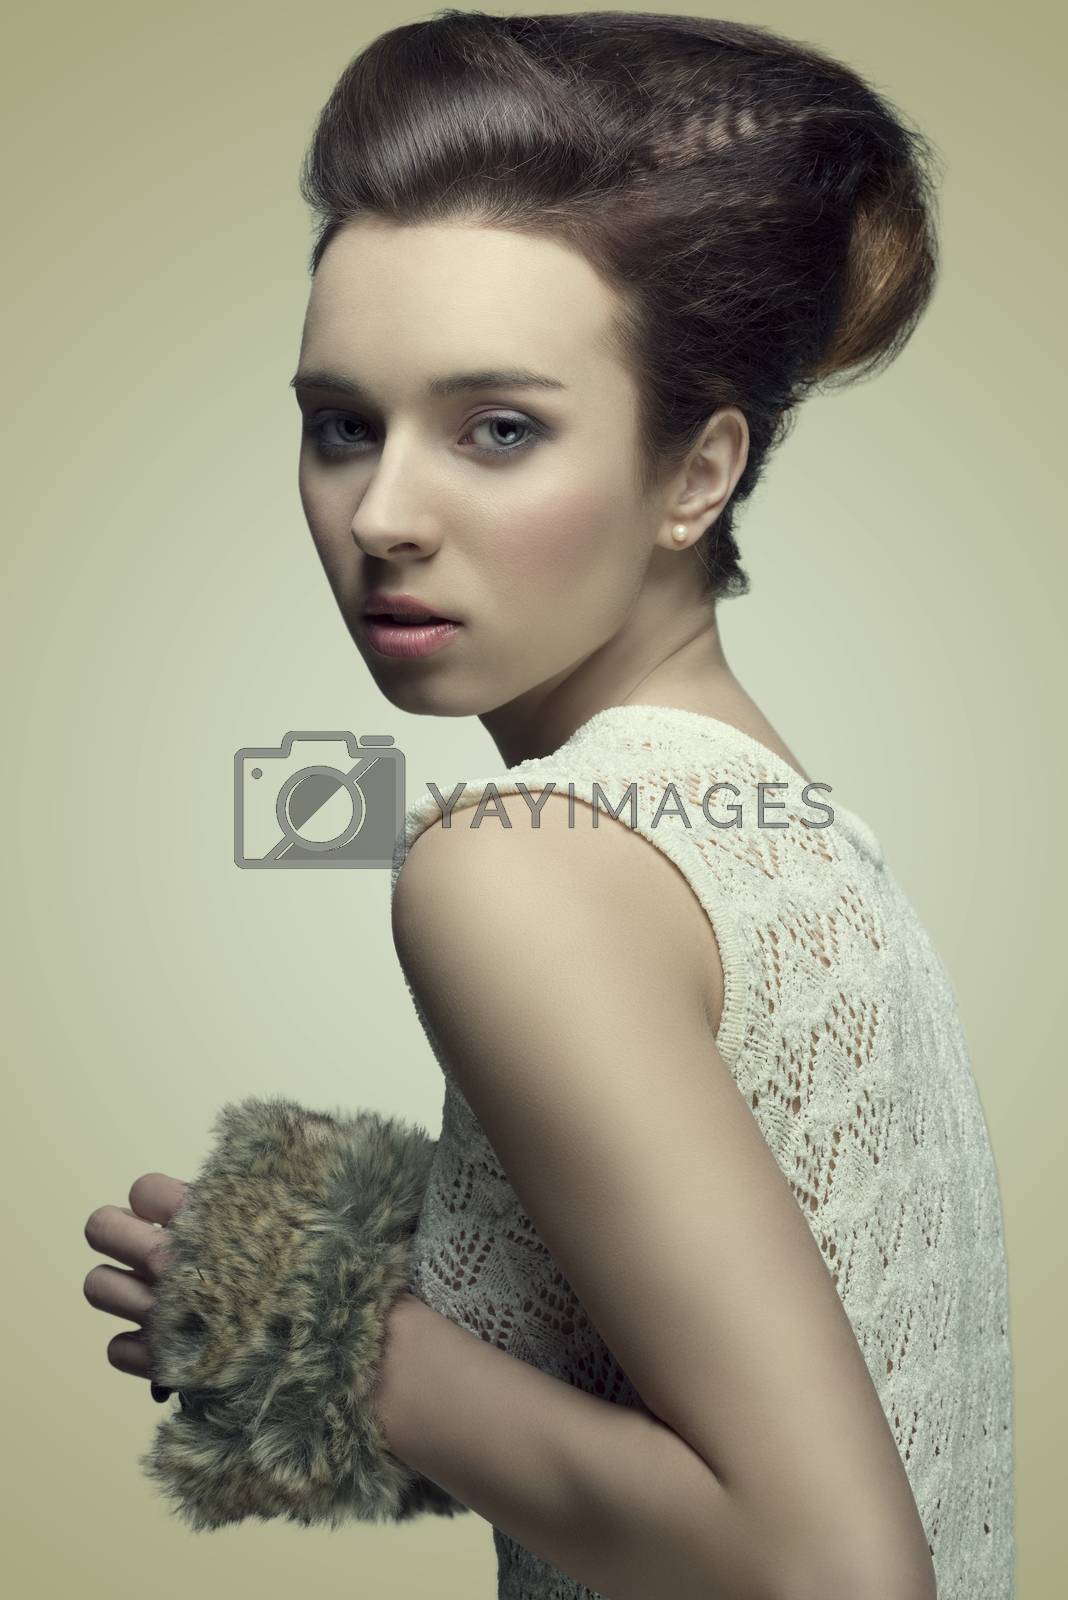 Royalty free image of sexy woman with fashion hairdo by fotoCD